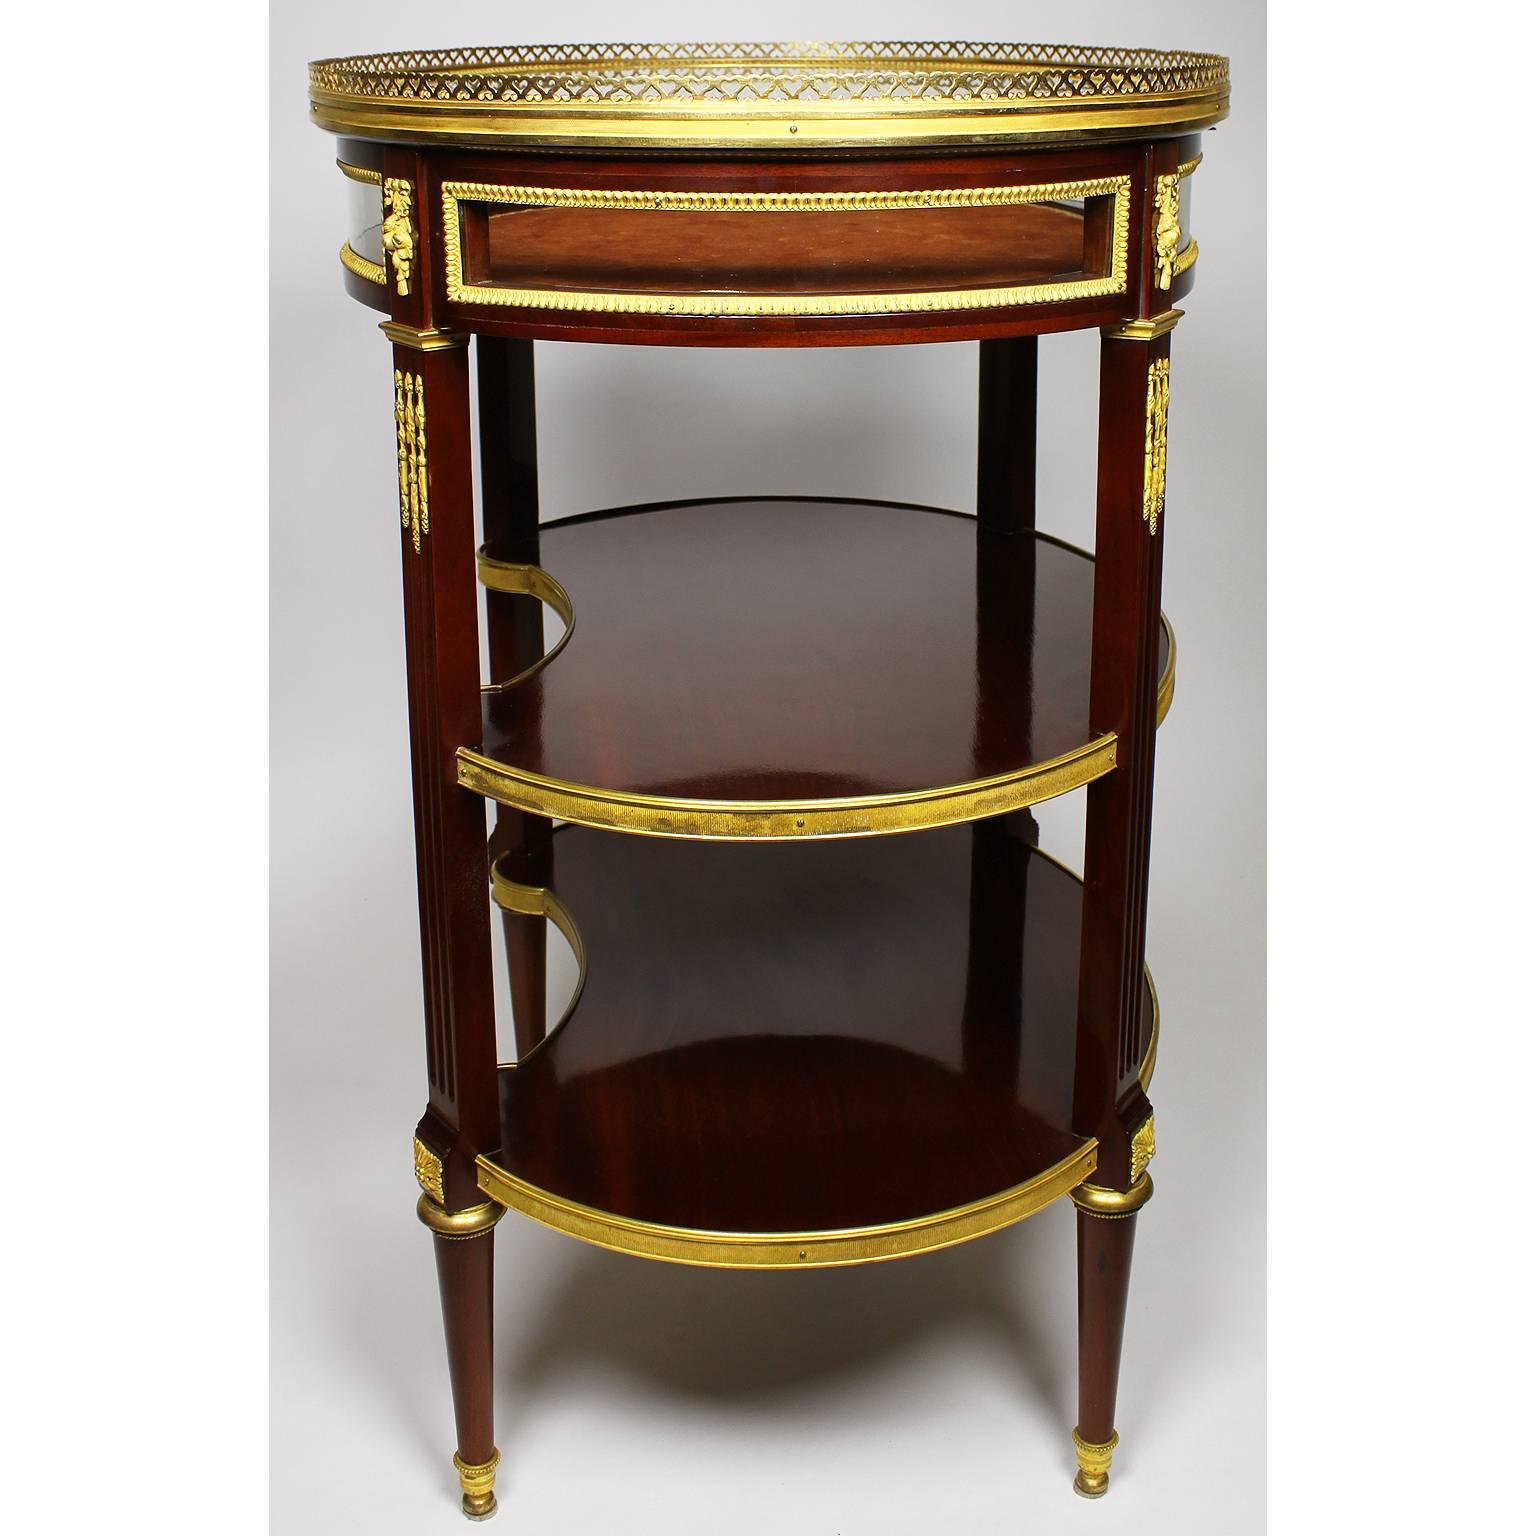 Glass Louis XVI Style Belle Epoque Ormolu-Mounted Vitrine Table, Attributed to Linke